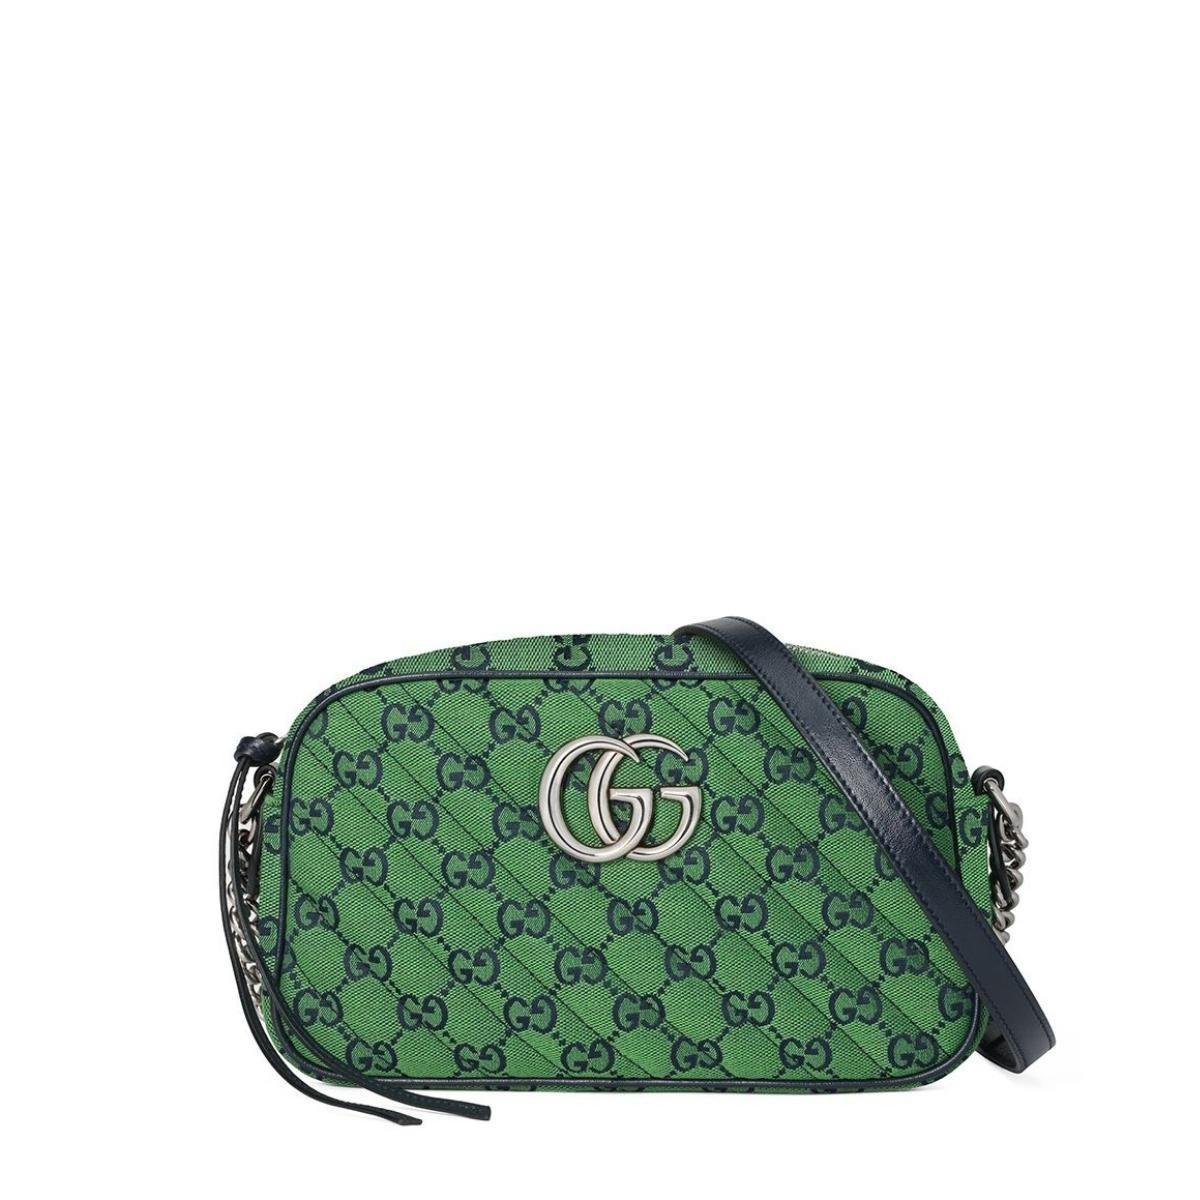 Follow us on insta @runwaycatalog
This GG Marmont small shoulder bag has an adjustable strap and is part of the GG Multicolor collection. 
Green and blue diagonal matelassé GG canvas. 
Blue leather trim. 
Silver-toned hardware. 
Double G. Interior